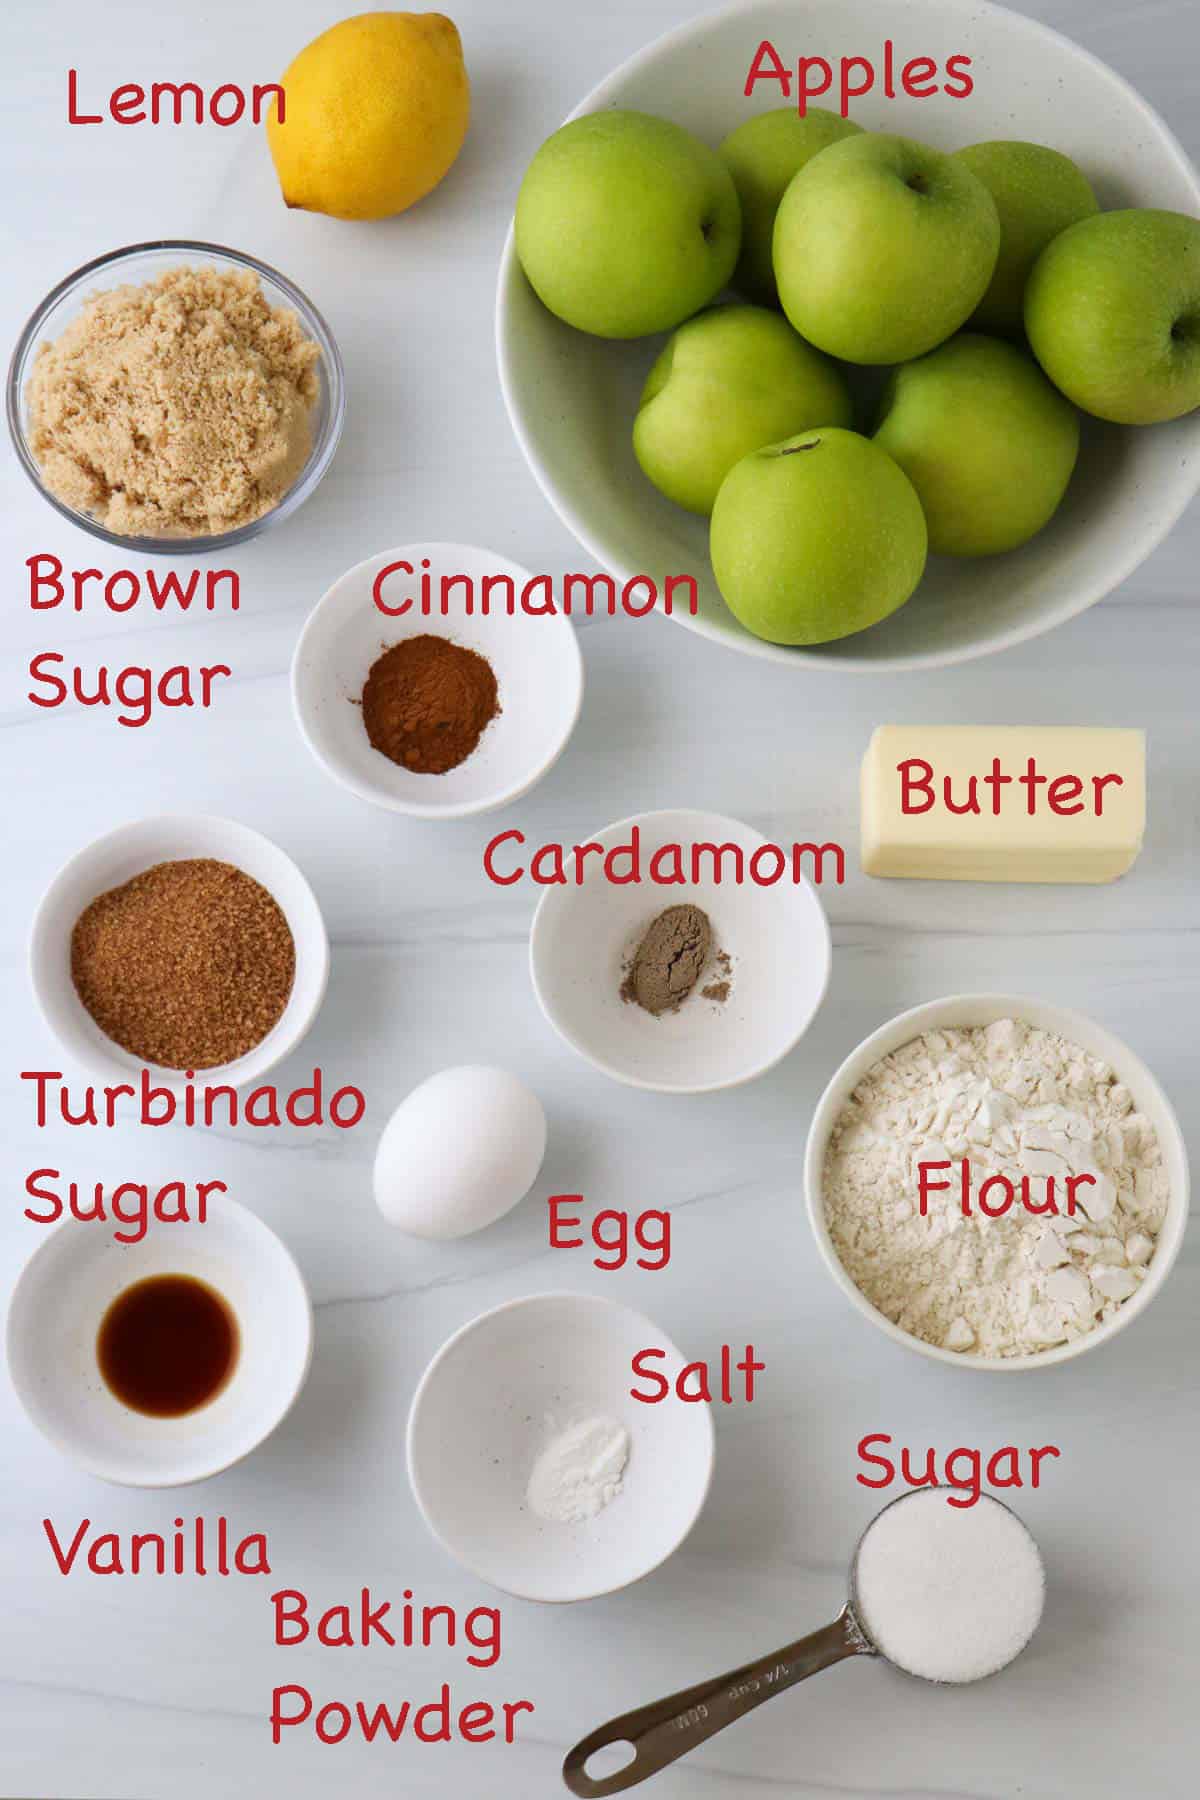 Labeled ingredients for Swedish Apple Pie.